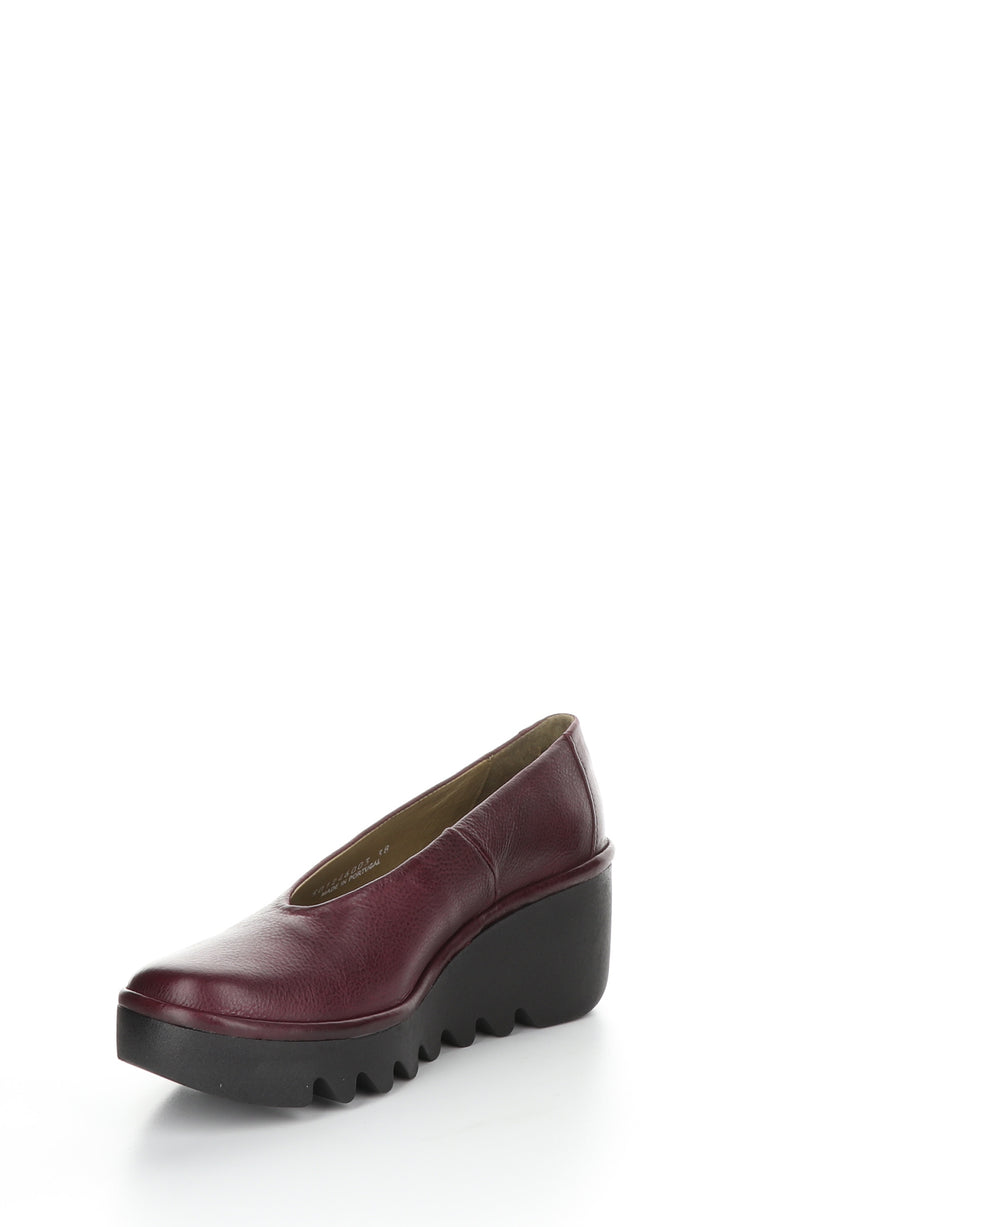 BESO246FLY Wine Round Toe Shoes|BESO246FLY Chaussures à Bout Rond in Rouge